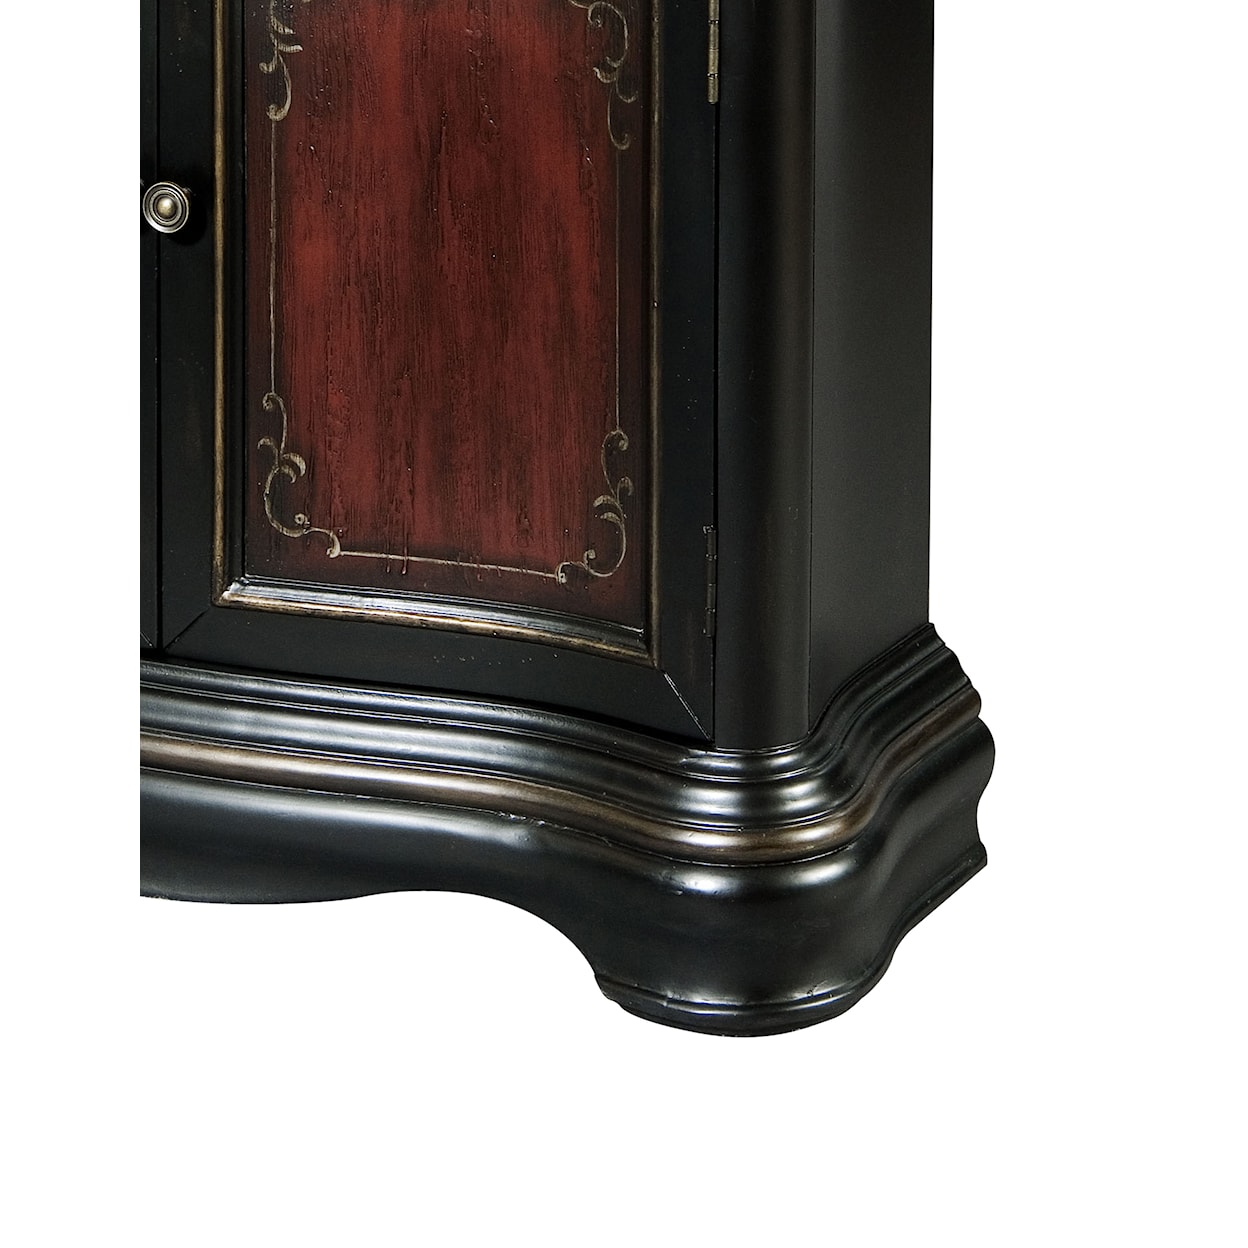 Accentrics Home Accents Two Toned Hand Pained Hall Chest